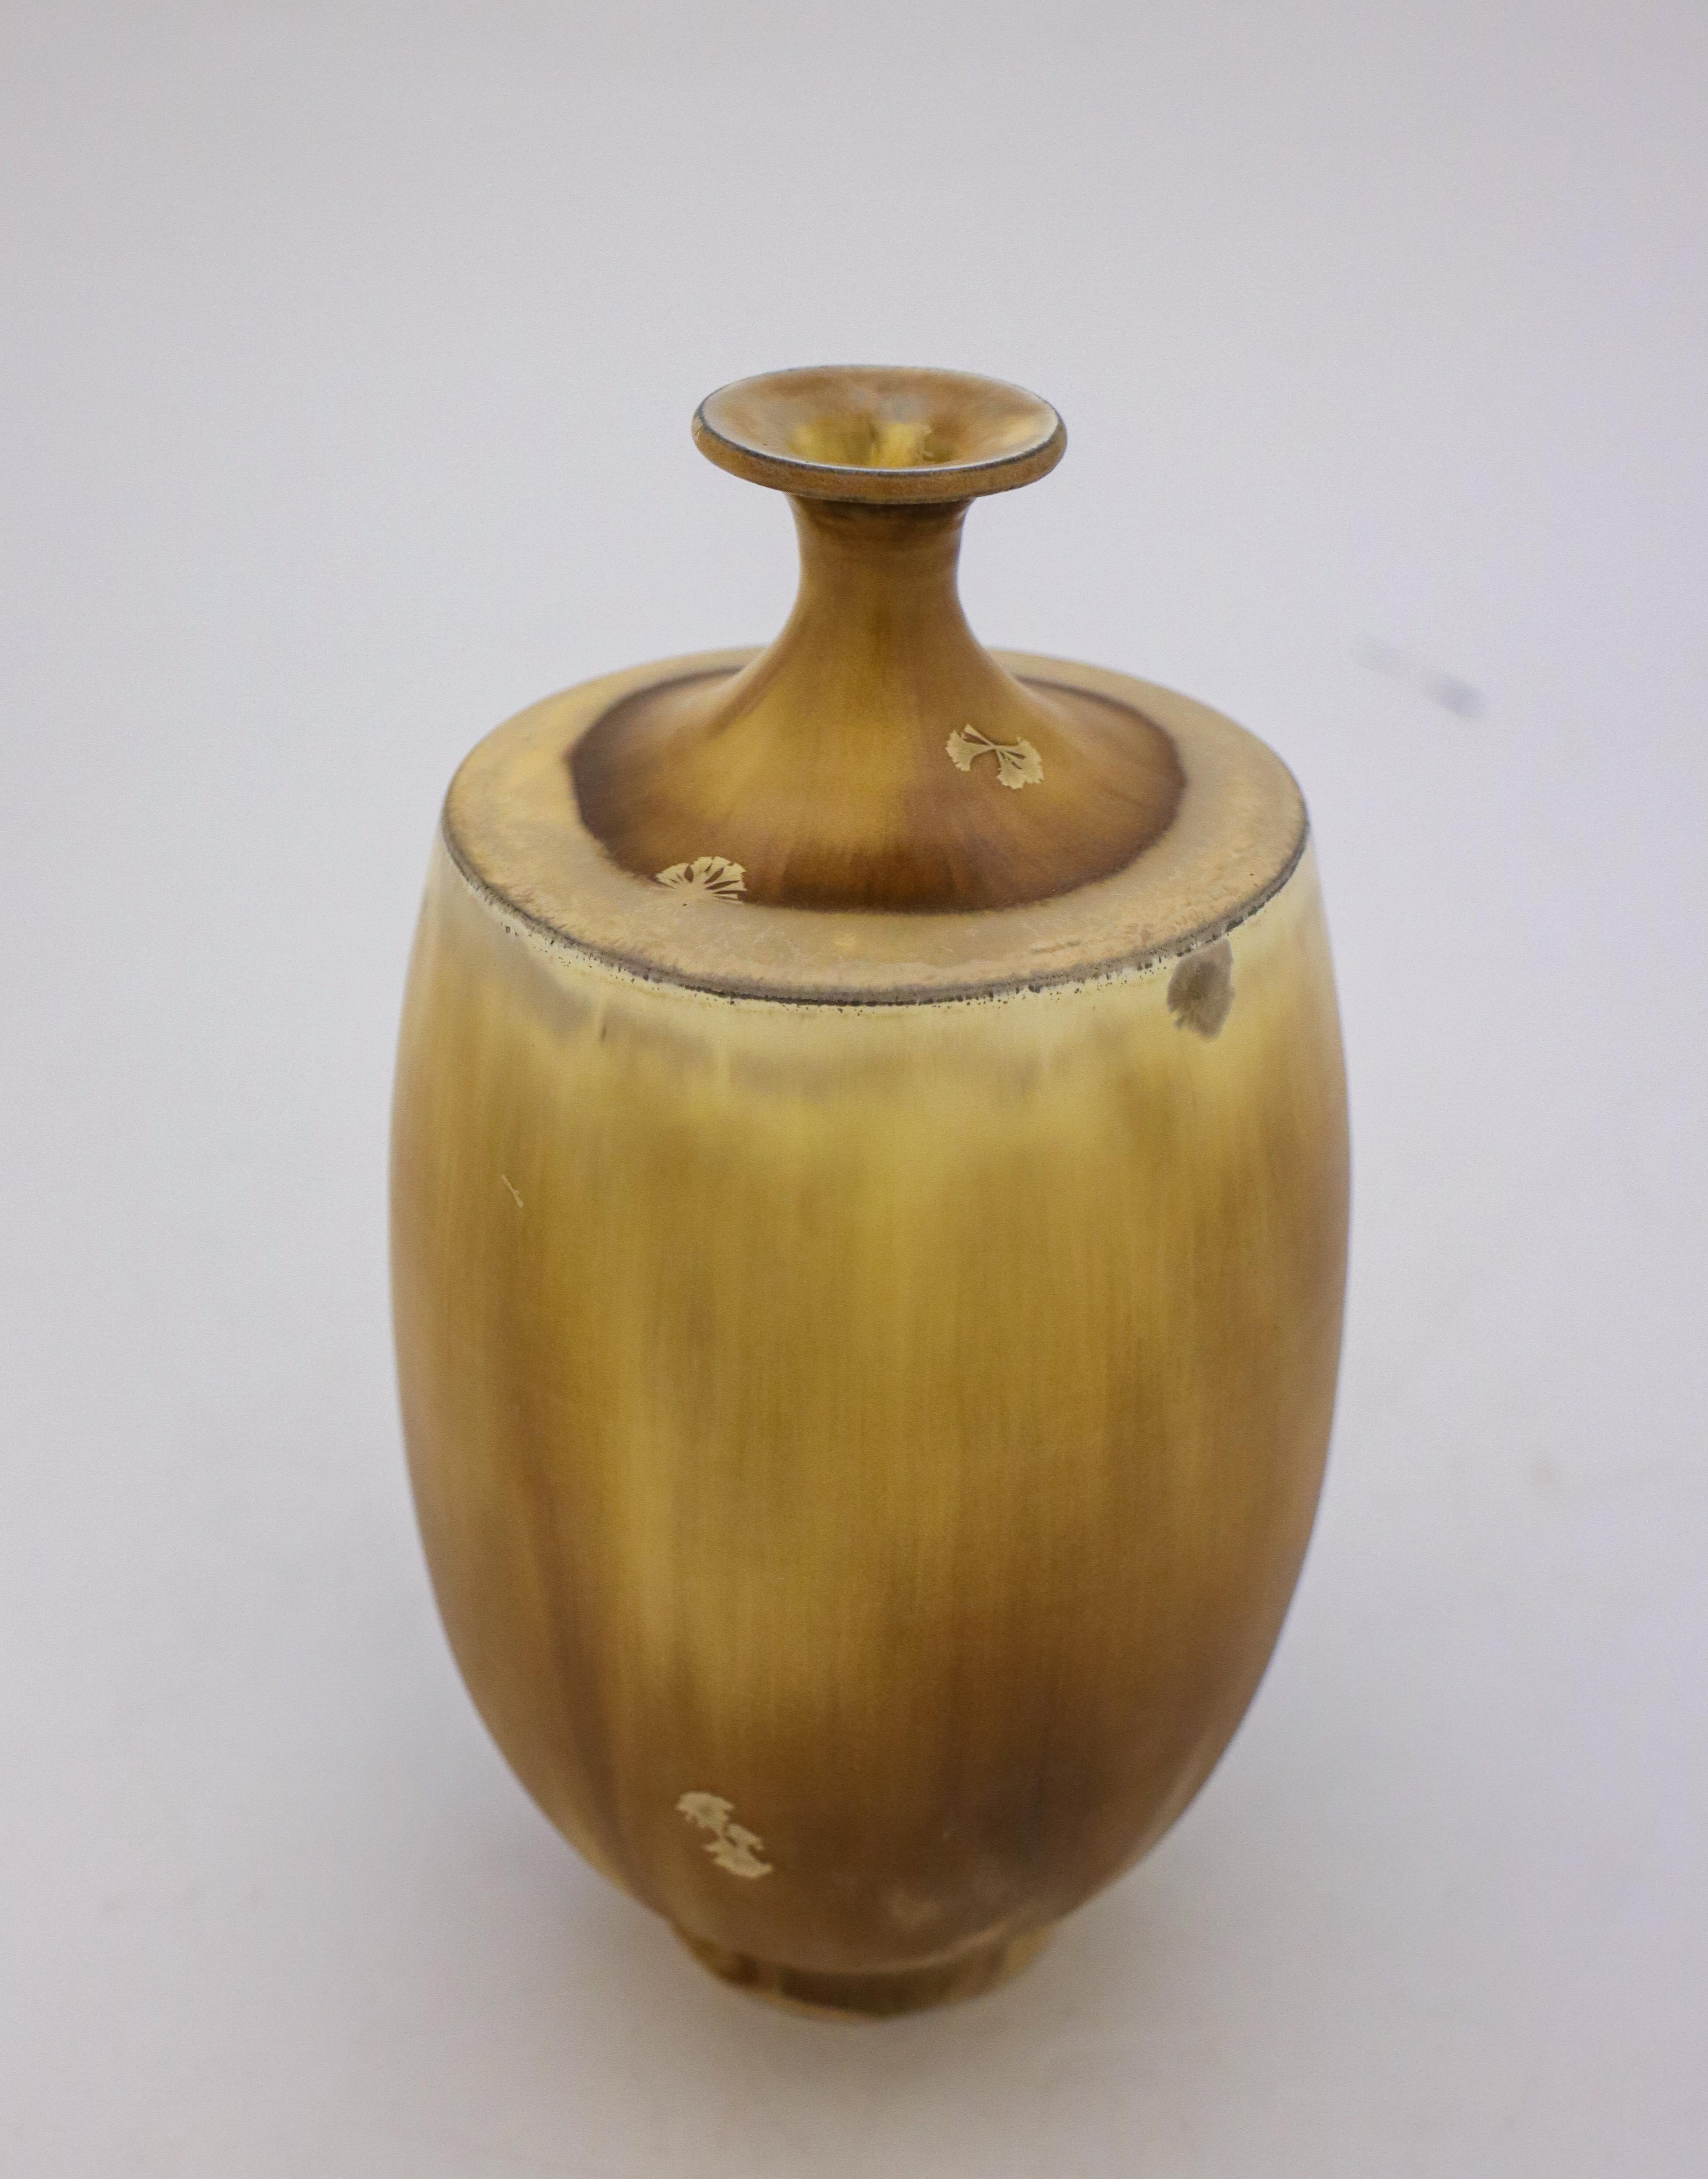 A unique vase in a beige / brown color with a crystalline glaze created by the contemporary Swedish artist Isak Isaksson in his own studio. The vase is 21 cm (8.4